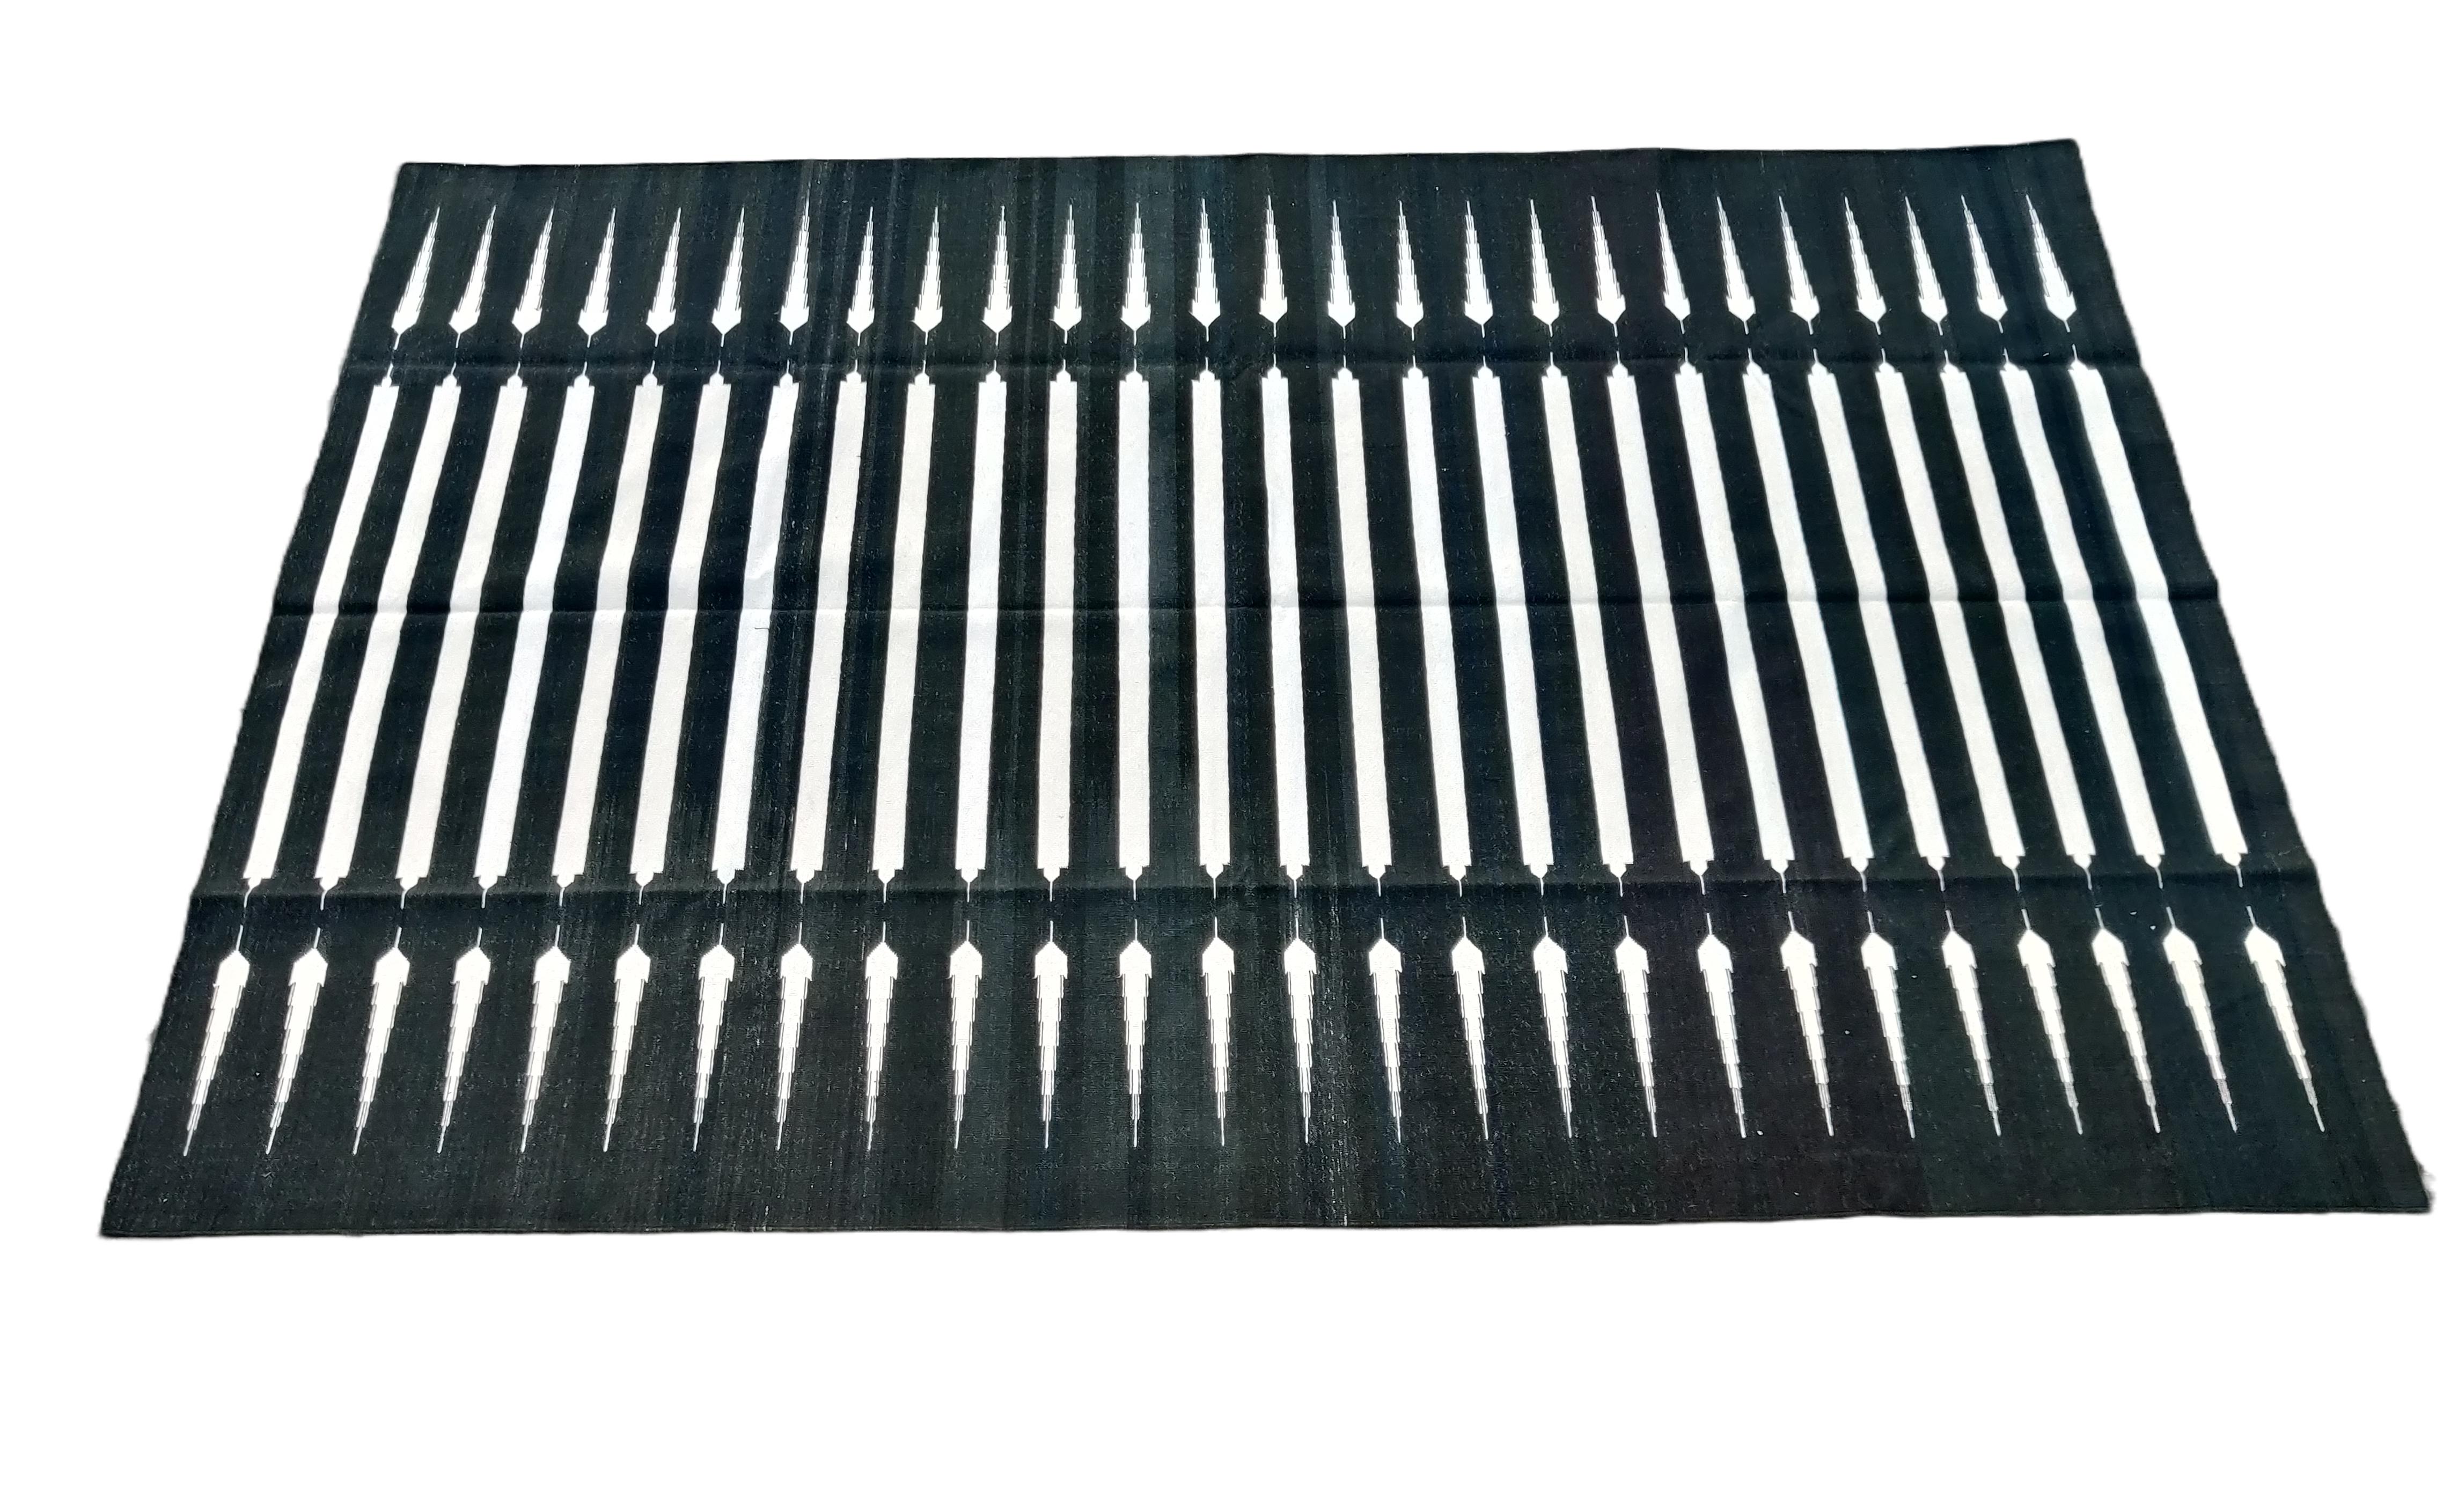 Cotton Vegetable Dyed Black And White Striped Indian Dhurrie Rug-6'x9' (180x270cm) 

These special flat-weave dhurries are hand-woven with 15 ply 100% cotton yarn. Due to the special manufacturing techniques used to create our rugs, the size and